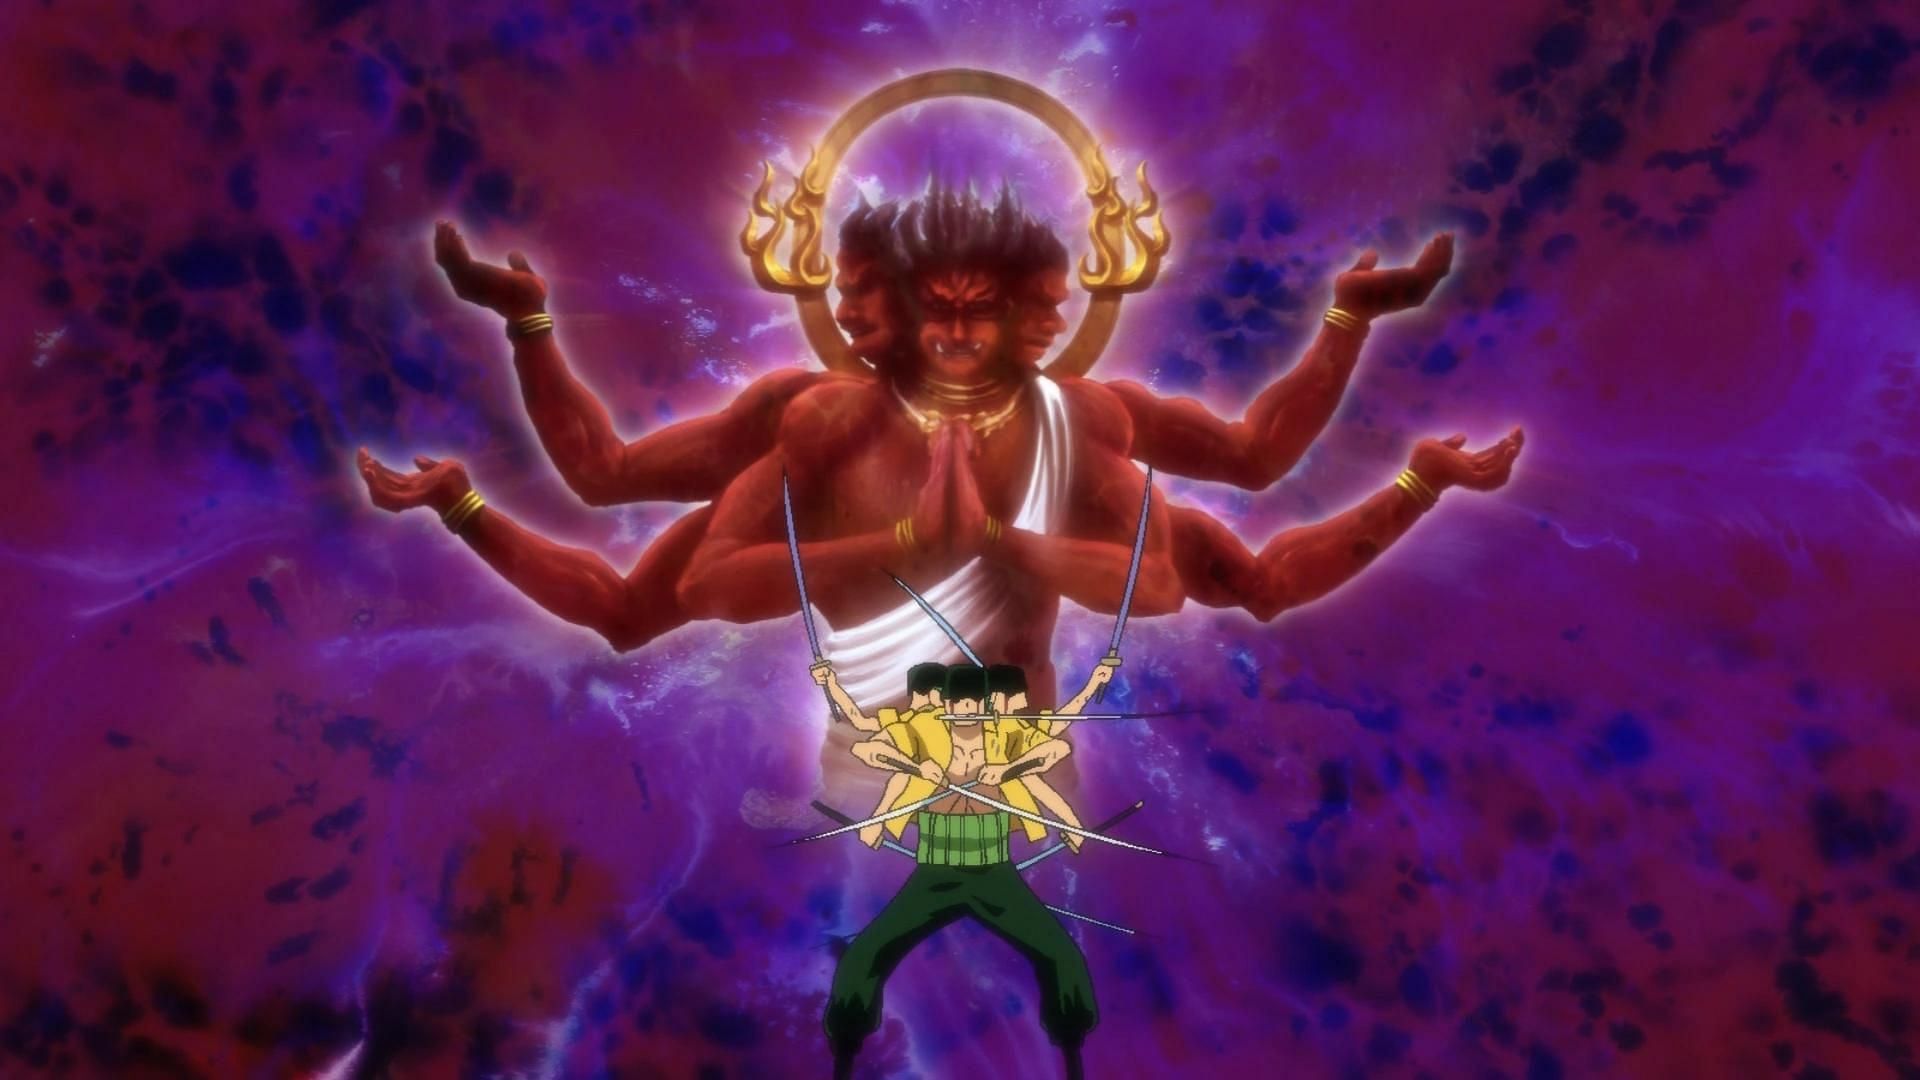 Zoro uses Asura for the first time (Image via Toei Animation)